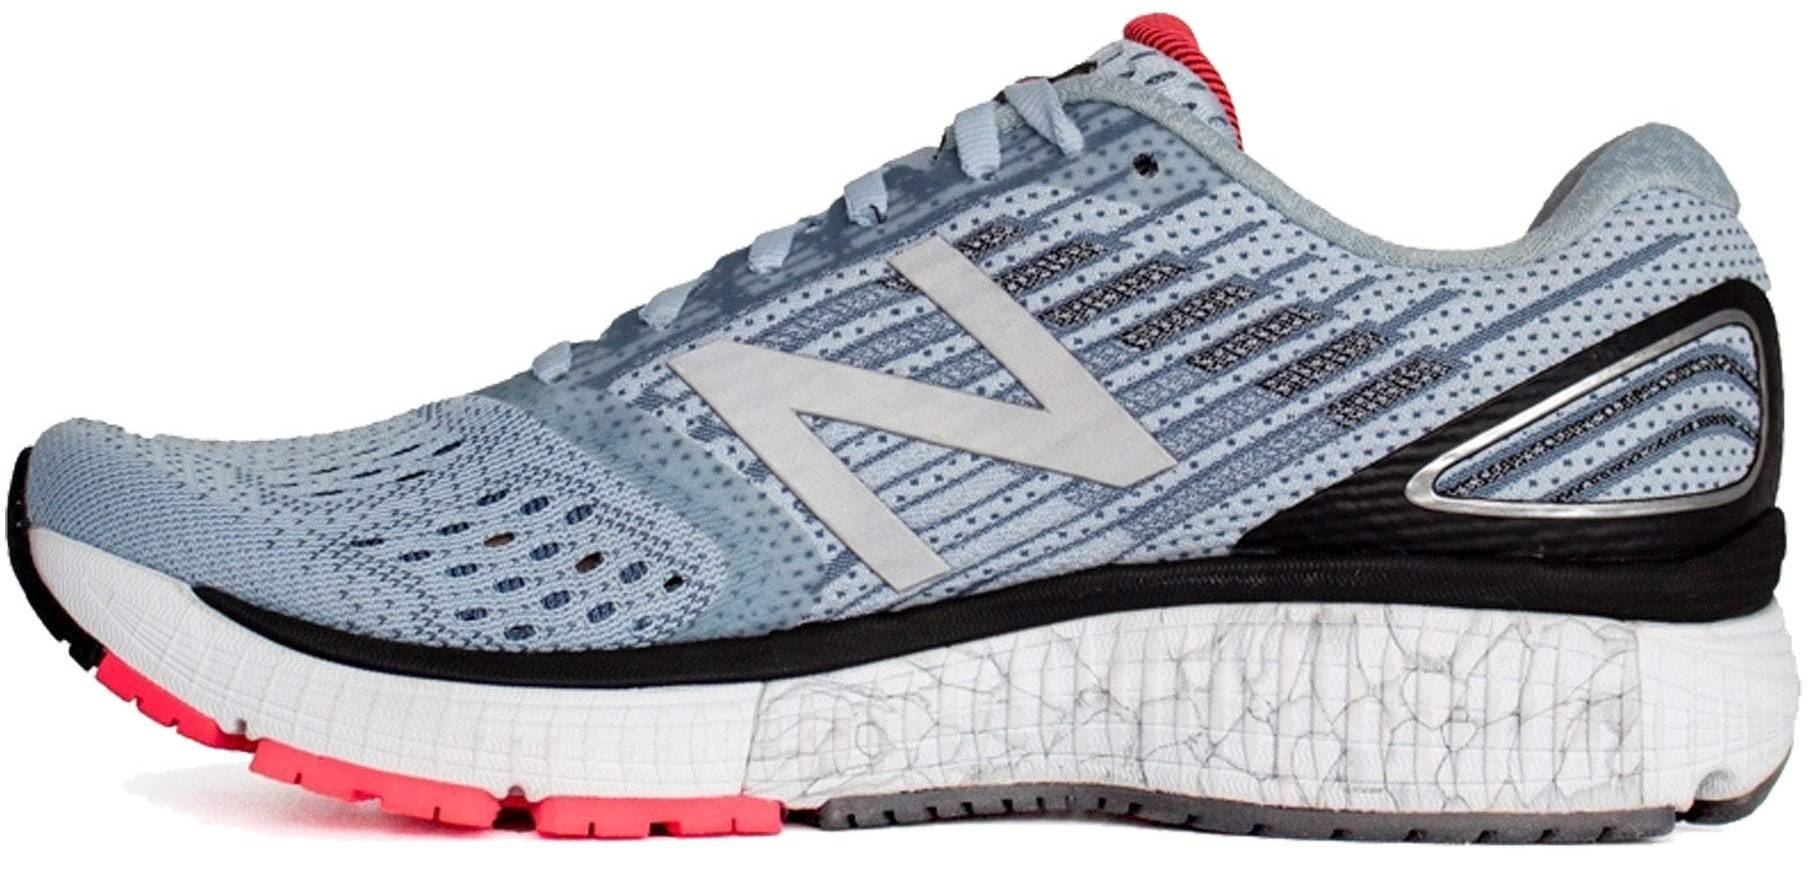 Only $58 + Review of New Balance 860 v9 